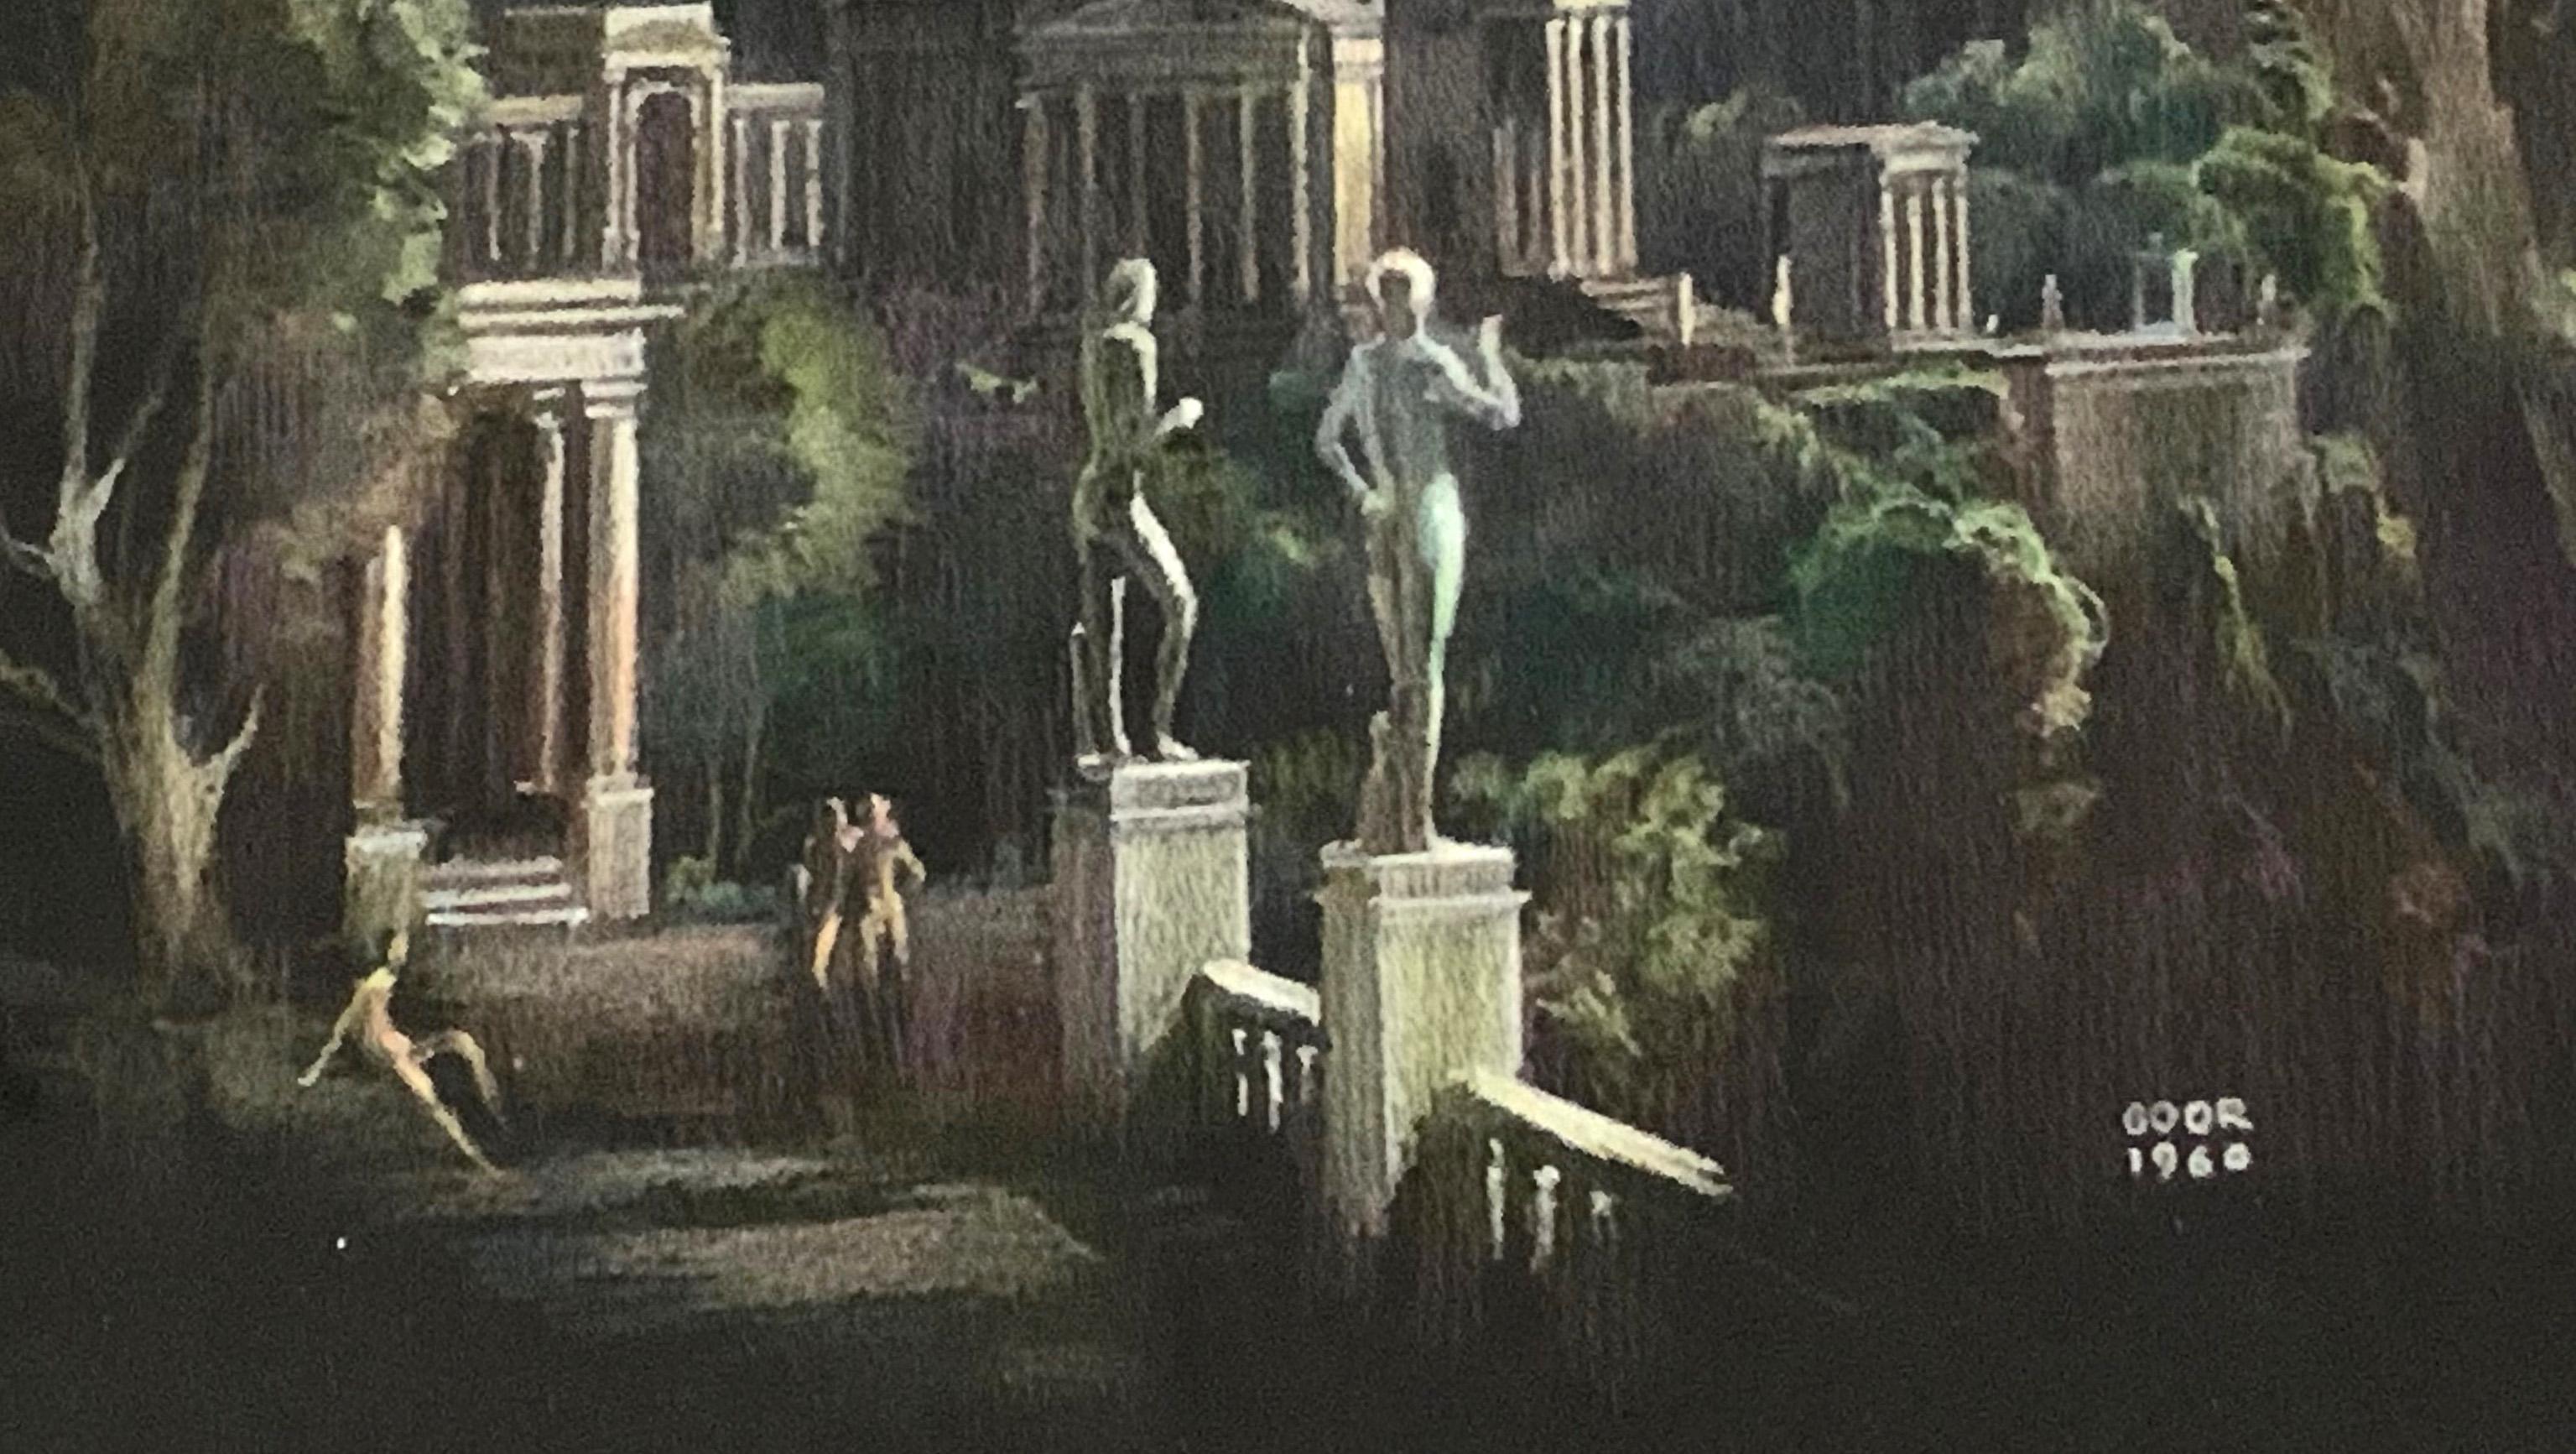 This idealized view of a Greek city of cliffside temples and columned walls climbing a craggy mountain is also the depiction of a homophile Shangri-La, where lithe nude male figures linger along the colonnades, and nude sculptures -- again of male